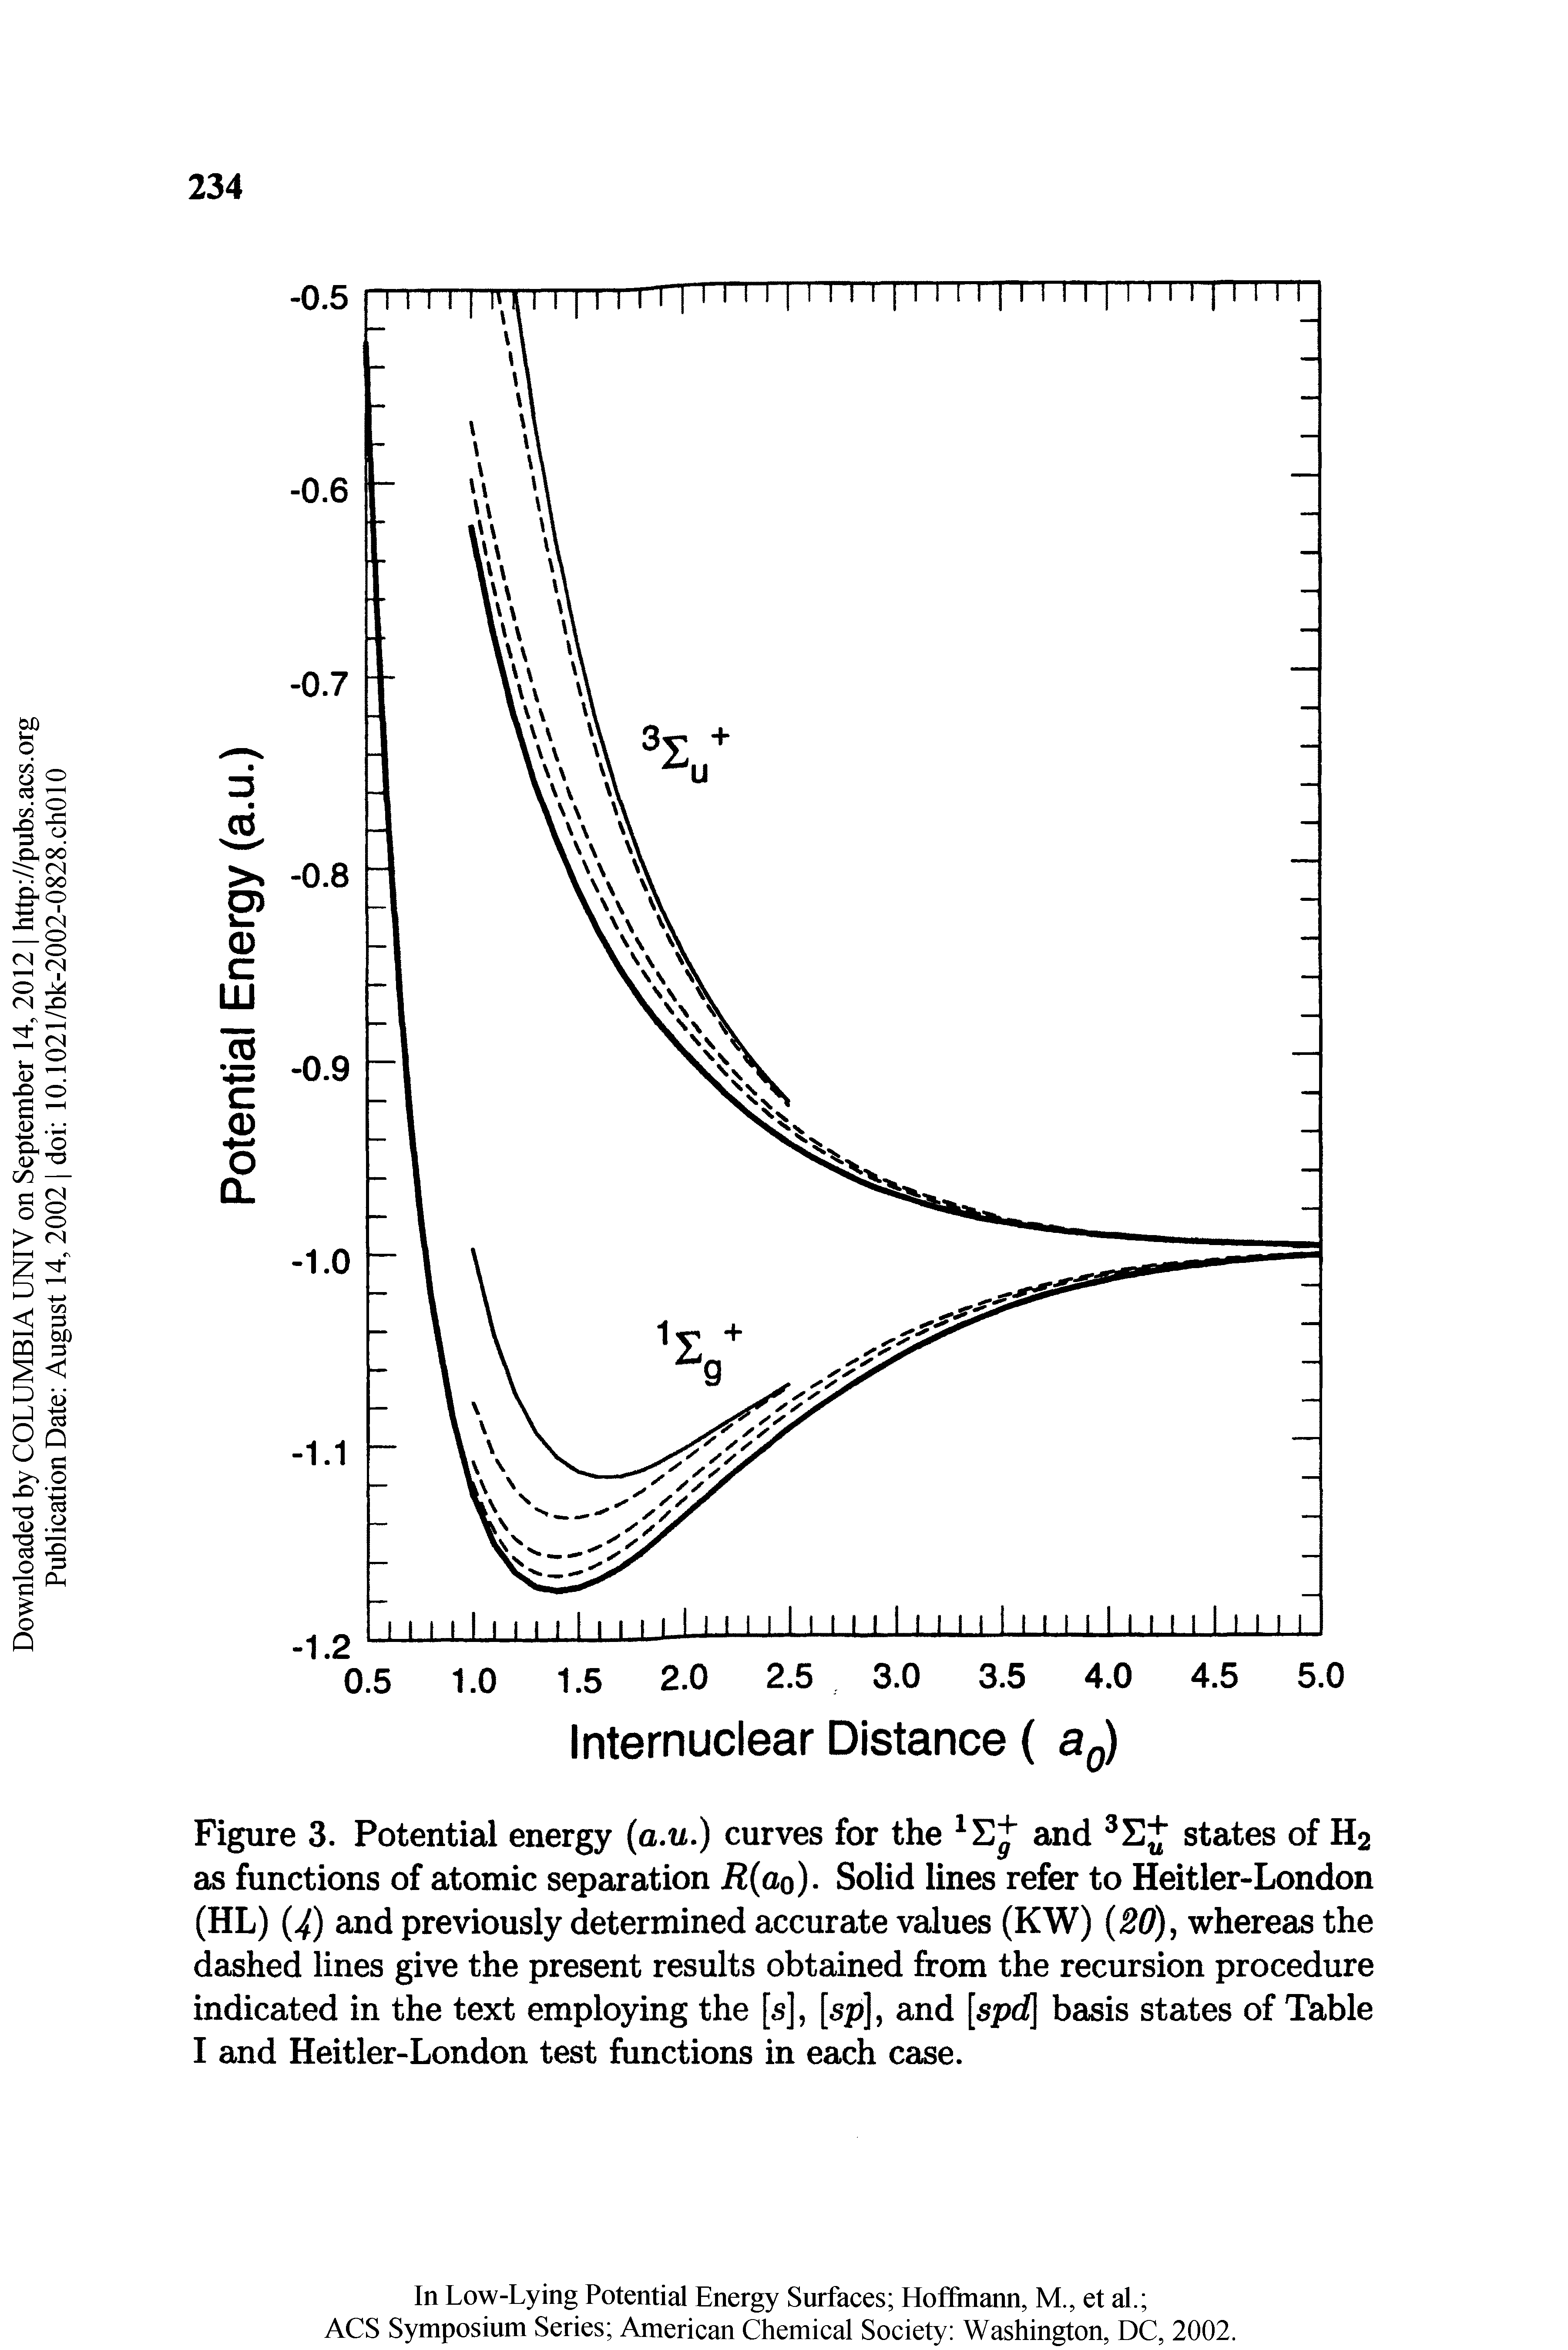 Figure 3. Potential energy (a.u.) curves for the and states of H2 as functions of atomic separation E(ao). Solid lines refer to Heitler-London (HL) (4) and previously determined accurate values (KW) (SO), whereas the dashed lines give the present results obtained from the recursion procedure indicated in the text employing the [s], [sp], and [spd basis states of Table I and Heitler-London test functions in each case.